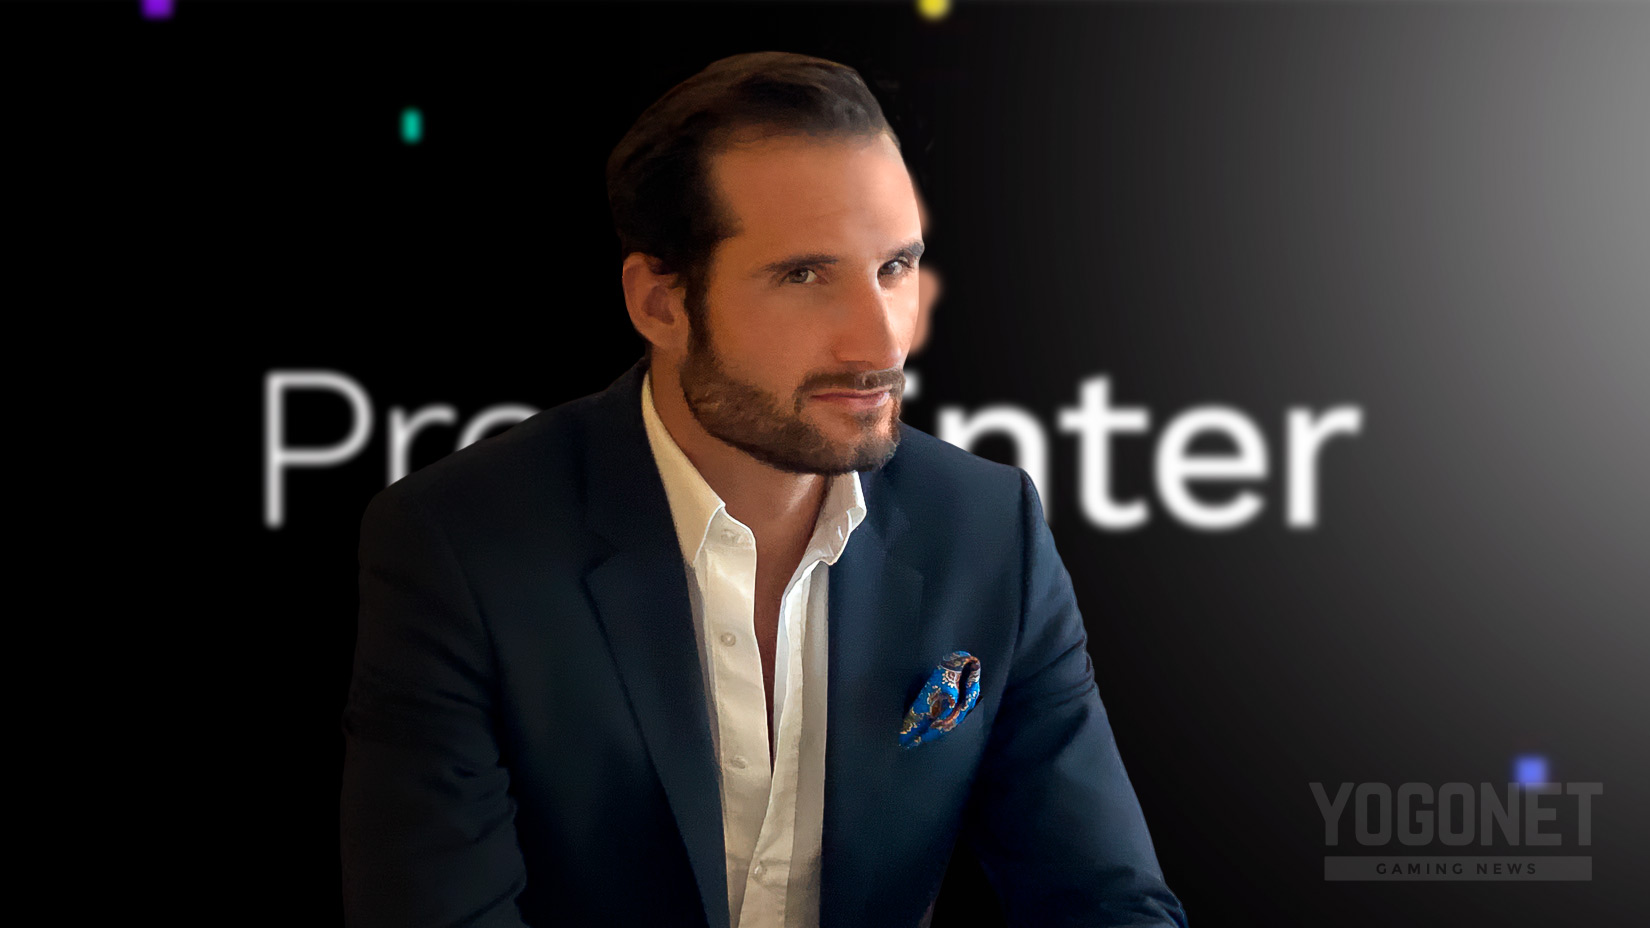 PressEnter: “Latin America will ultimately become one of the largest regulated online gambling jurisdictions in the world”